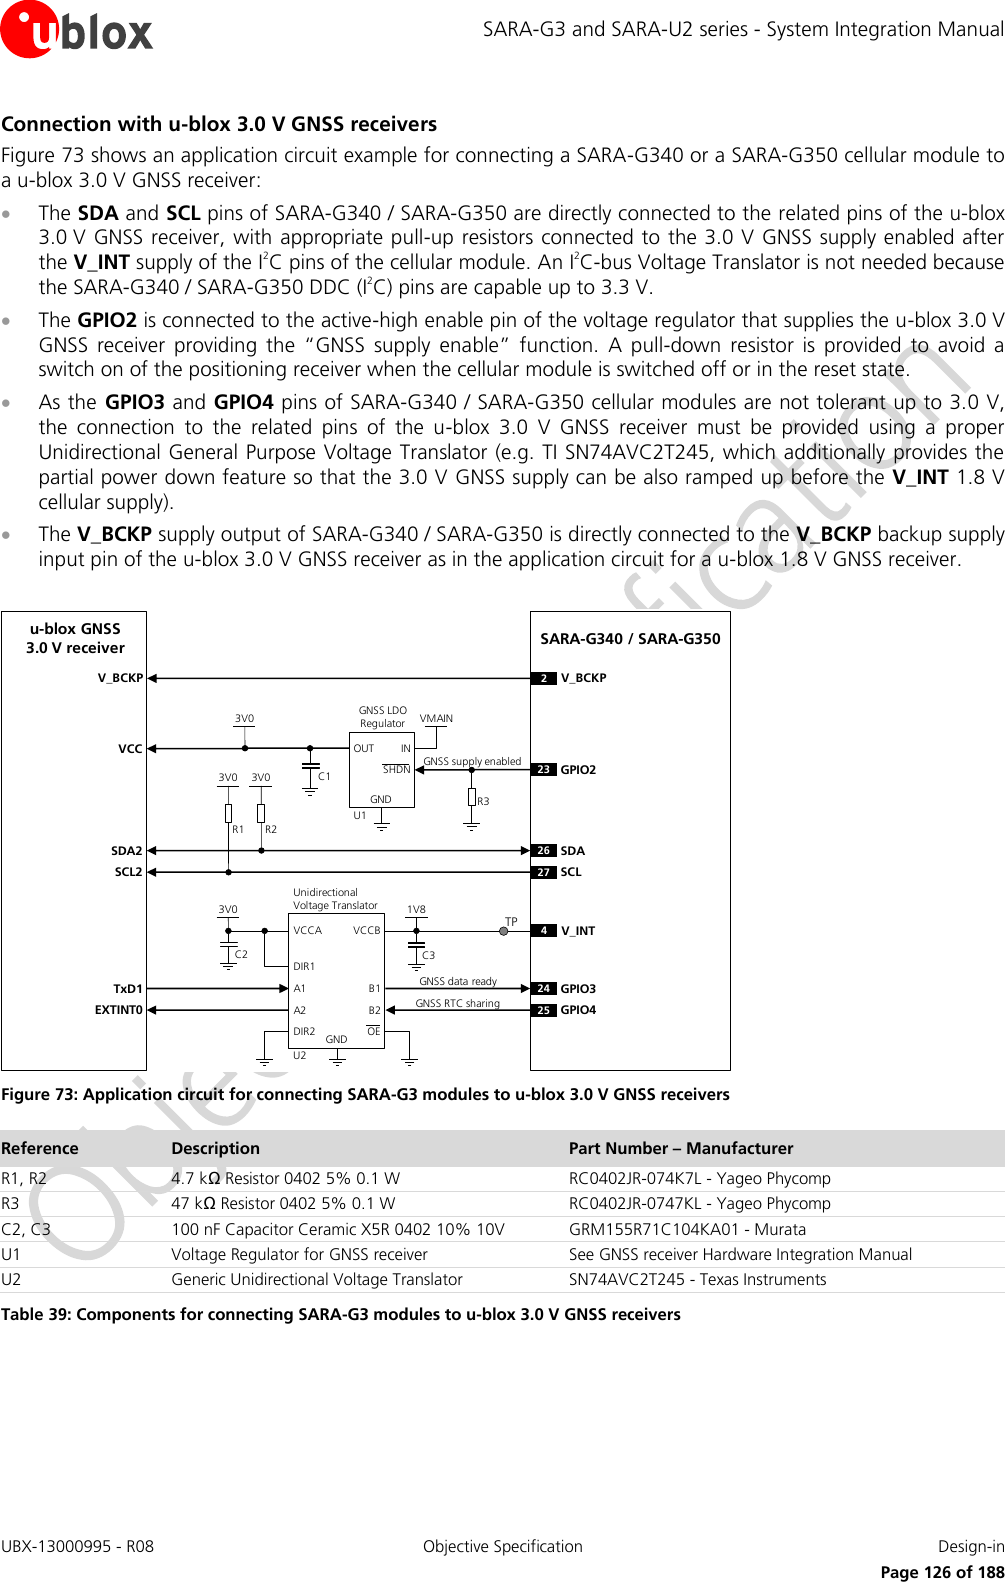 SARA-G3 and SARA-U2 series - System Integration Manual UBX-13000995 - R08  Objective Specification  Design-in     Page 126 of 188 Connection with u-blox 3.0 V GNSS receivers Figure 73 shows an application circuit example for connecting a SARA-G340 or a SARA-G350 cellular module to a u-blox 3.0 V GNSS receiver:  The SDA and SCL pins of SARA-G340 / SARA-G350 are directly connected to the related pins of the u-blox 3.0 V GNSS receiver, with appropriate pull-up resistors connected to the 3.0 V GNSS supply enabled after the V_INT supply of the I2C pins of the cellular module. An I2C-bus Voltage Translator is not needed because the SARA-G340 / SARA-G350 DDC (I2C) pins are capable up to 3.3 V.  The GPIO2 is connected to the active-high enable pin of the voltage regulator that supplies the u-blox 3.0 V GNSS  receiver  providing  the  “GNSS  supply  enable”  function.  A  pull-down  resistor  is  provided  to  avoid  a switch on of the positioning receiver when the cellular module is switched off or in the reset state.  As the  GPIO3 and GPIO4 pins of SARA-G340 / SARA-G350 cellular modules are not tolerant up to 3.0 V, the  connection  to  the  related  pins  of  the  u-blox  3.0  V  GNSS  receiver  must  be  provided  using  a  proper Unidirectional General Purpose Voltage Translator (e.g. TI SN74AVC2T245, which additionally provides the partial power down feature so that the 3.0 V GNSS supply can be also ramped up before the V_INT 1.8 V cellular supply).  The V_BCKP supply output of SARA-G340 / SARA-G350 is directly connected to the V_BCKP backup supply input pin of the u-blox 3.0 V GNSS receiver as in the application circuit for a u-blox 1.8 V GNSS receiver.  SARA-G340 / SARA-G350R1INOUTGNDGNSS LDORegulatorSHDNu-blox GNSS3.0 V receiverSDA2SCL2R23V0 3V0VMAIN3V0U123 GPIO2SDASCLC12627VCCR3V_BCKP V_BCKP224 GPIO325 GPIO41V8B1 A1GNDU2B2A2VCCBVCCAUnidirectionalVoltage TranslatorC2 C33V0TxD1EXTINT04V_INTDIR1DIR2 OEGNSS data readyGNSS RTC sharingTPGNSS supply enabled Figure 73: Application circuit for connecting SARA-G3 modules to u-blox 3.0 V GNSS receivers Reference Description Part Number – Manufacturer R1, R2 4.7 kΩ Resistor 0402 5% 0.1 W  RC0402JR-074K7L - Yageo Phycomp R3 47 kΩ Resistor 0402 5% 0.1 W  RC0402JR-0747KL - Yageo Phycomp C2, C3 100 nF Capacitor Ceramic X5R 0402 10% 10V GRM155R71C104KA01 - Murata U1 Voltage Regulator for GNSS receiver See GNSS receiver Hardware Integration Manual U2 Generic Unidirectional Voltage Translator SN74AVC2T245 - Texas Instruments Table 39: Components for connecting SARA-G3 modules to u-blox 3.0 V GNSS receivers  